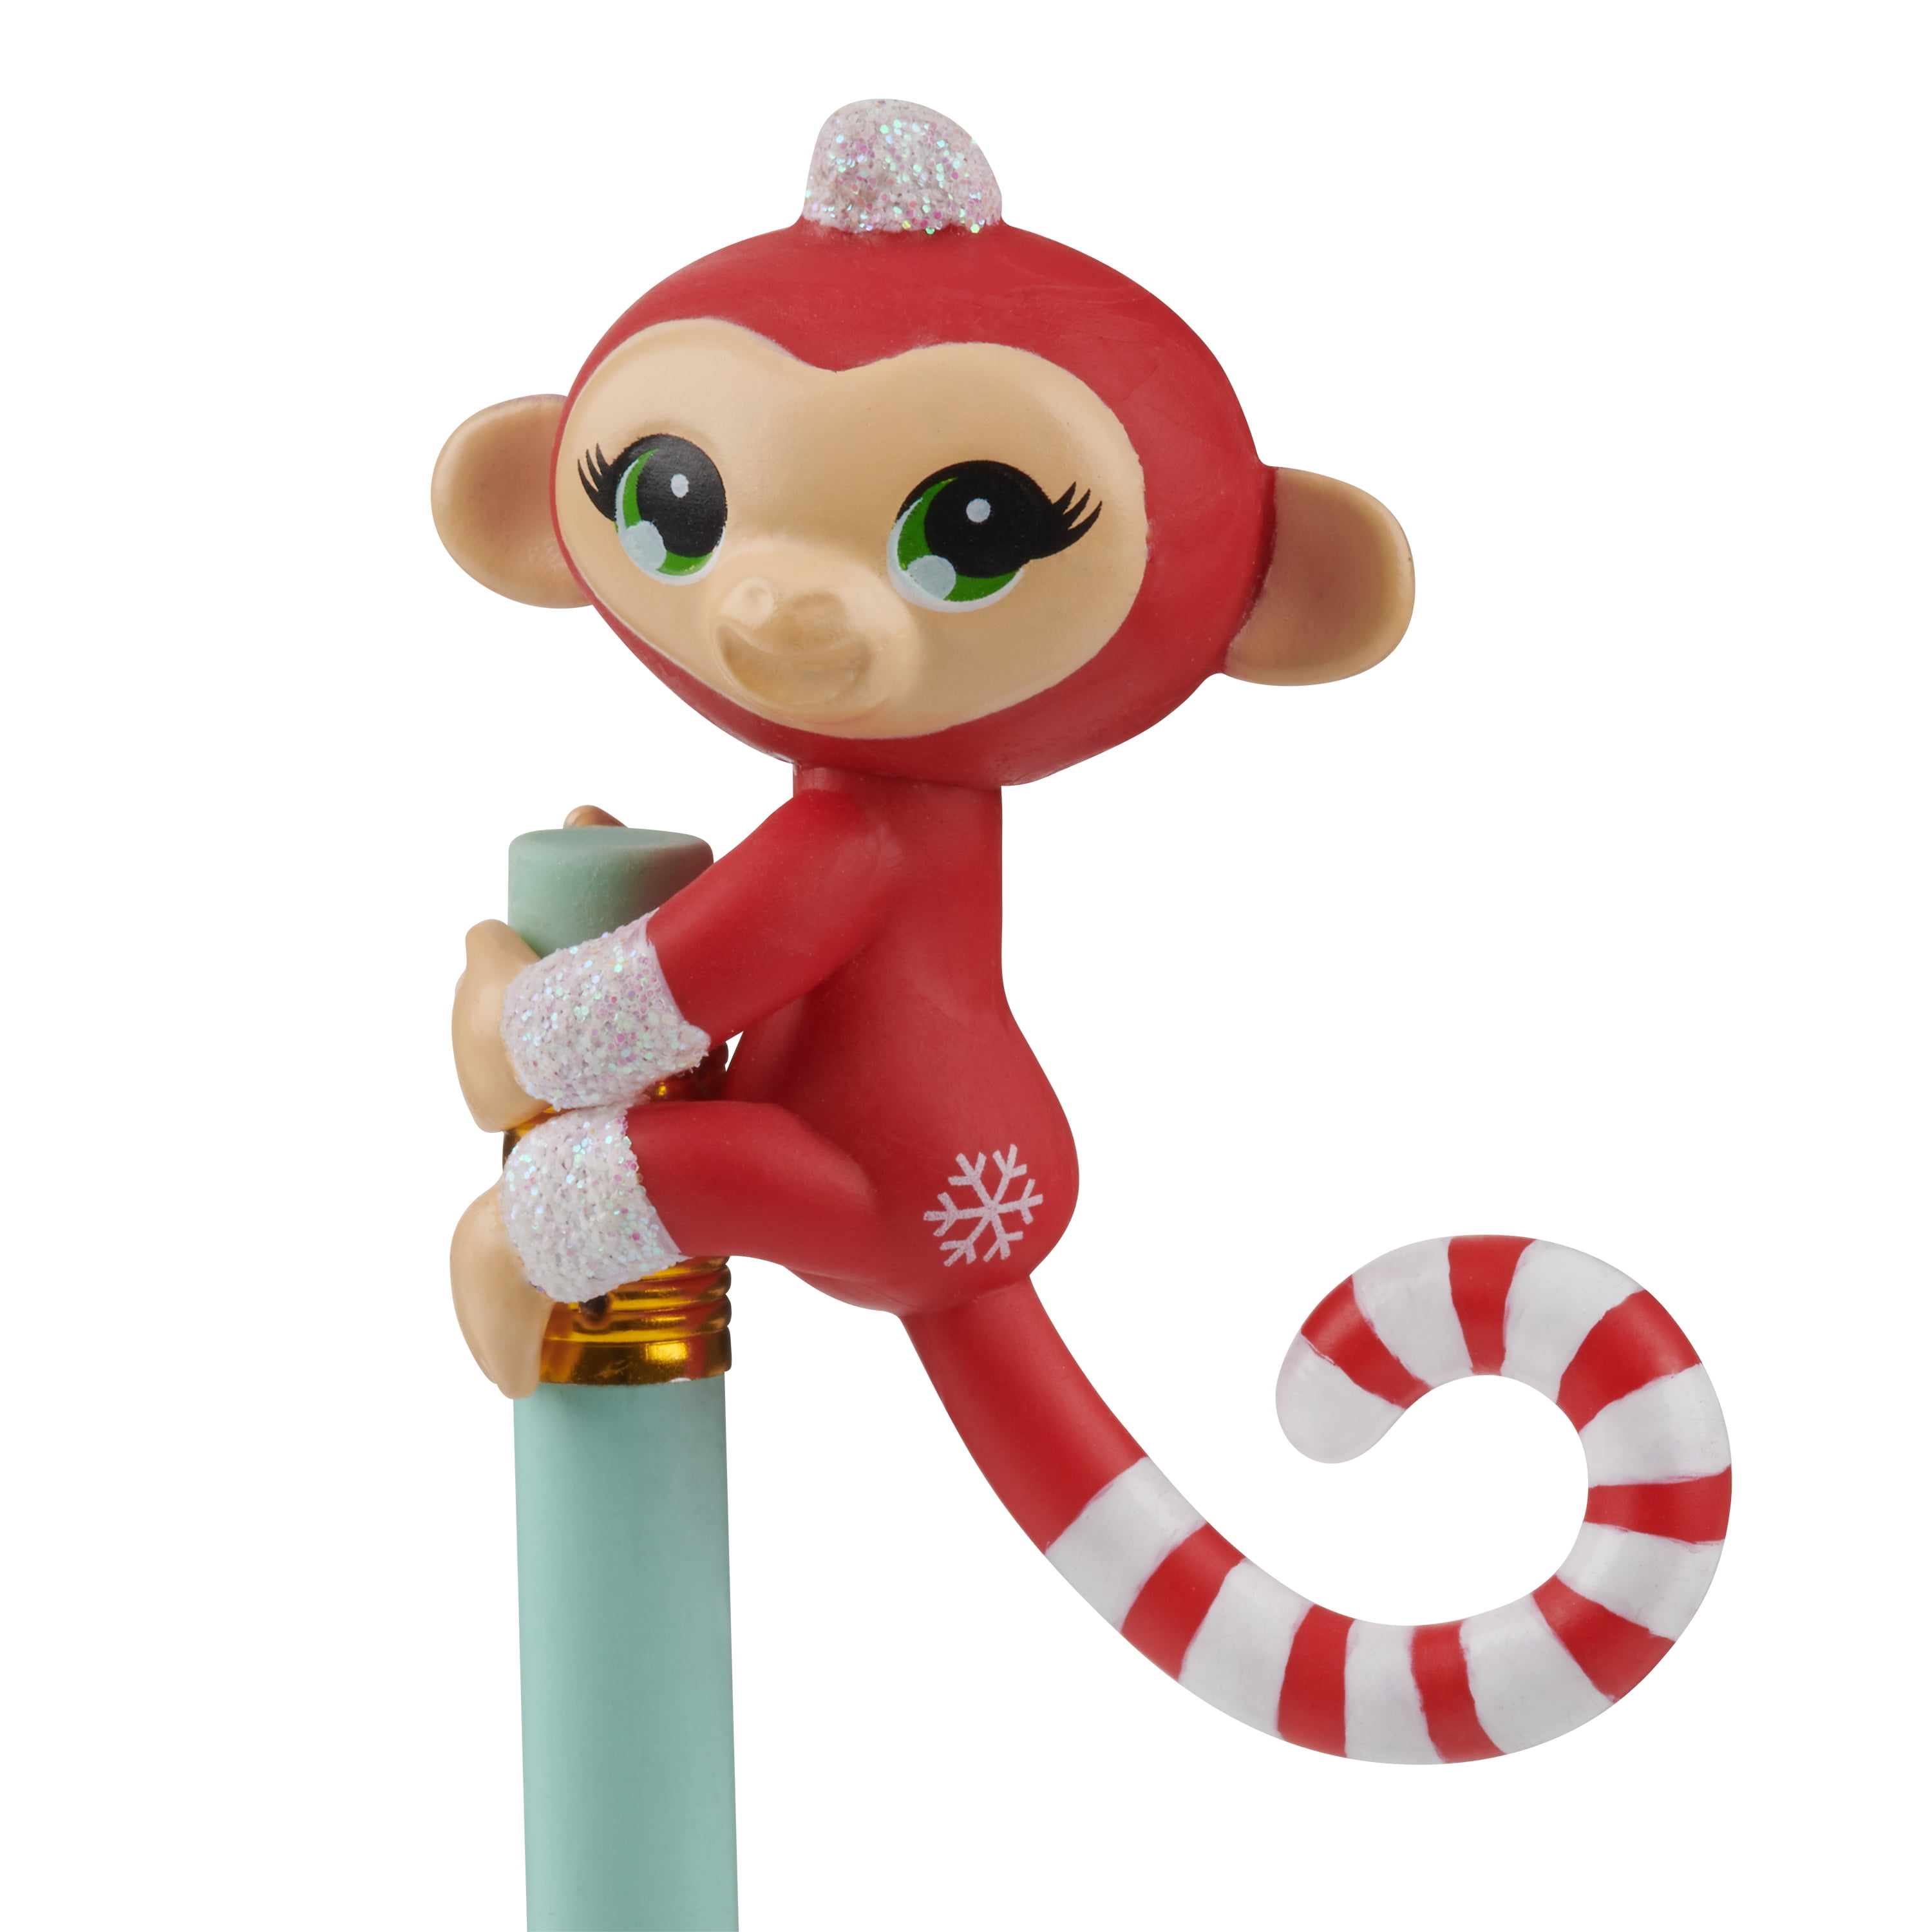 Details about   Fingerlings Christmas Holiday INTERACTIVE  with kids 3pc toy monkeys